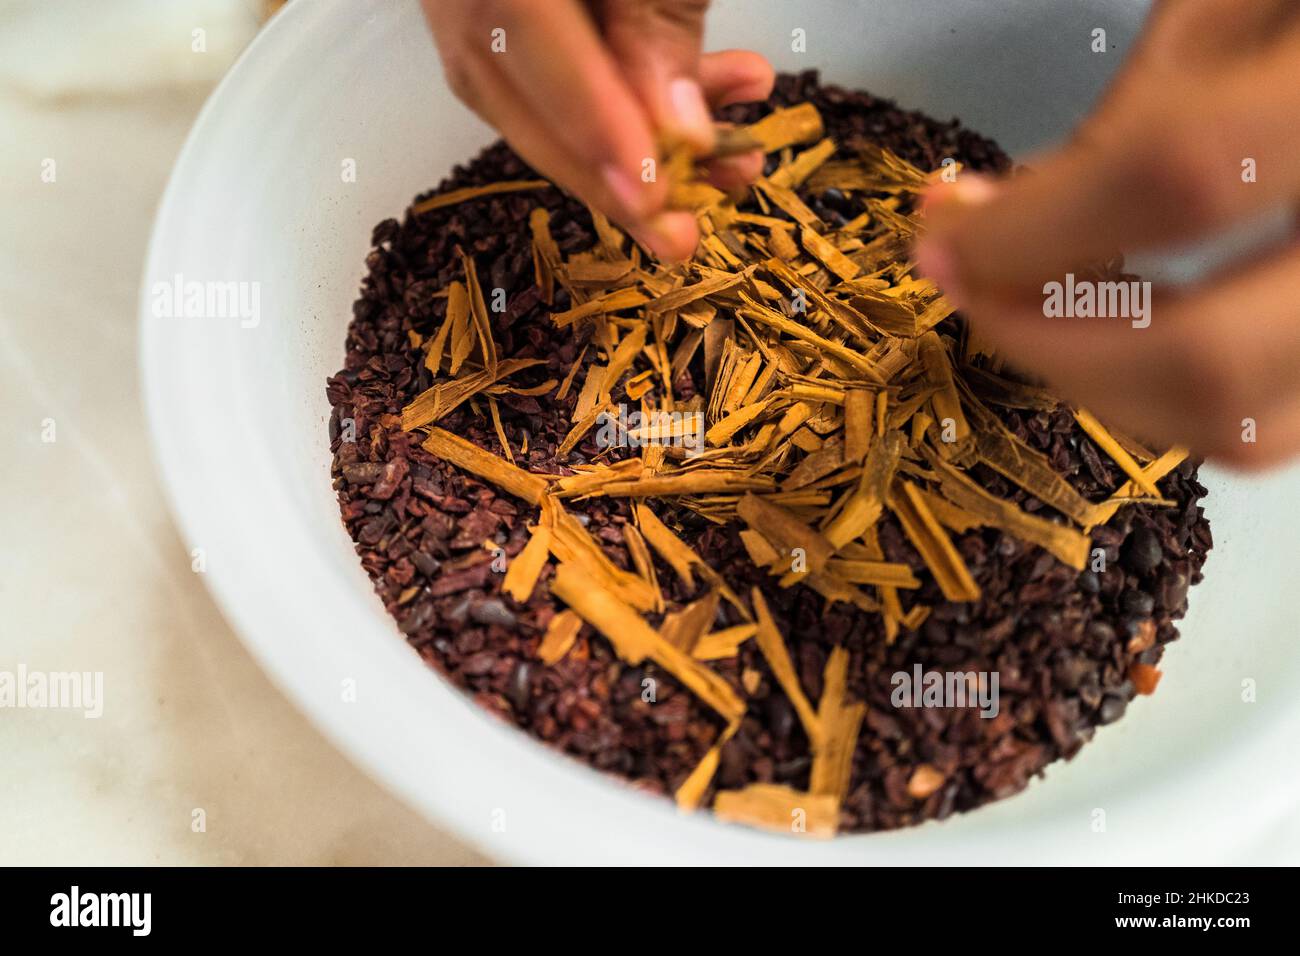 A Mexican man adds cinnamon into crushed cacao beans before the grinding process in artisanal chocolate manufacture in Xochistlahuaca, Mexico. Stock Photo